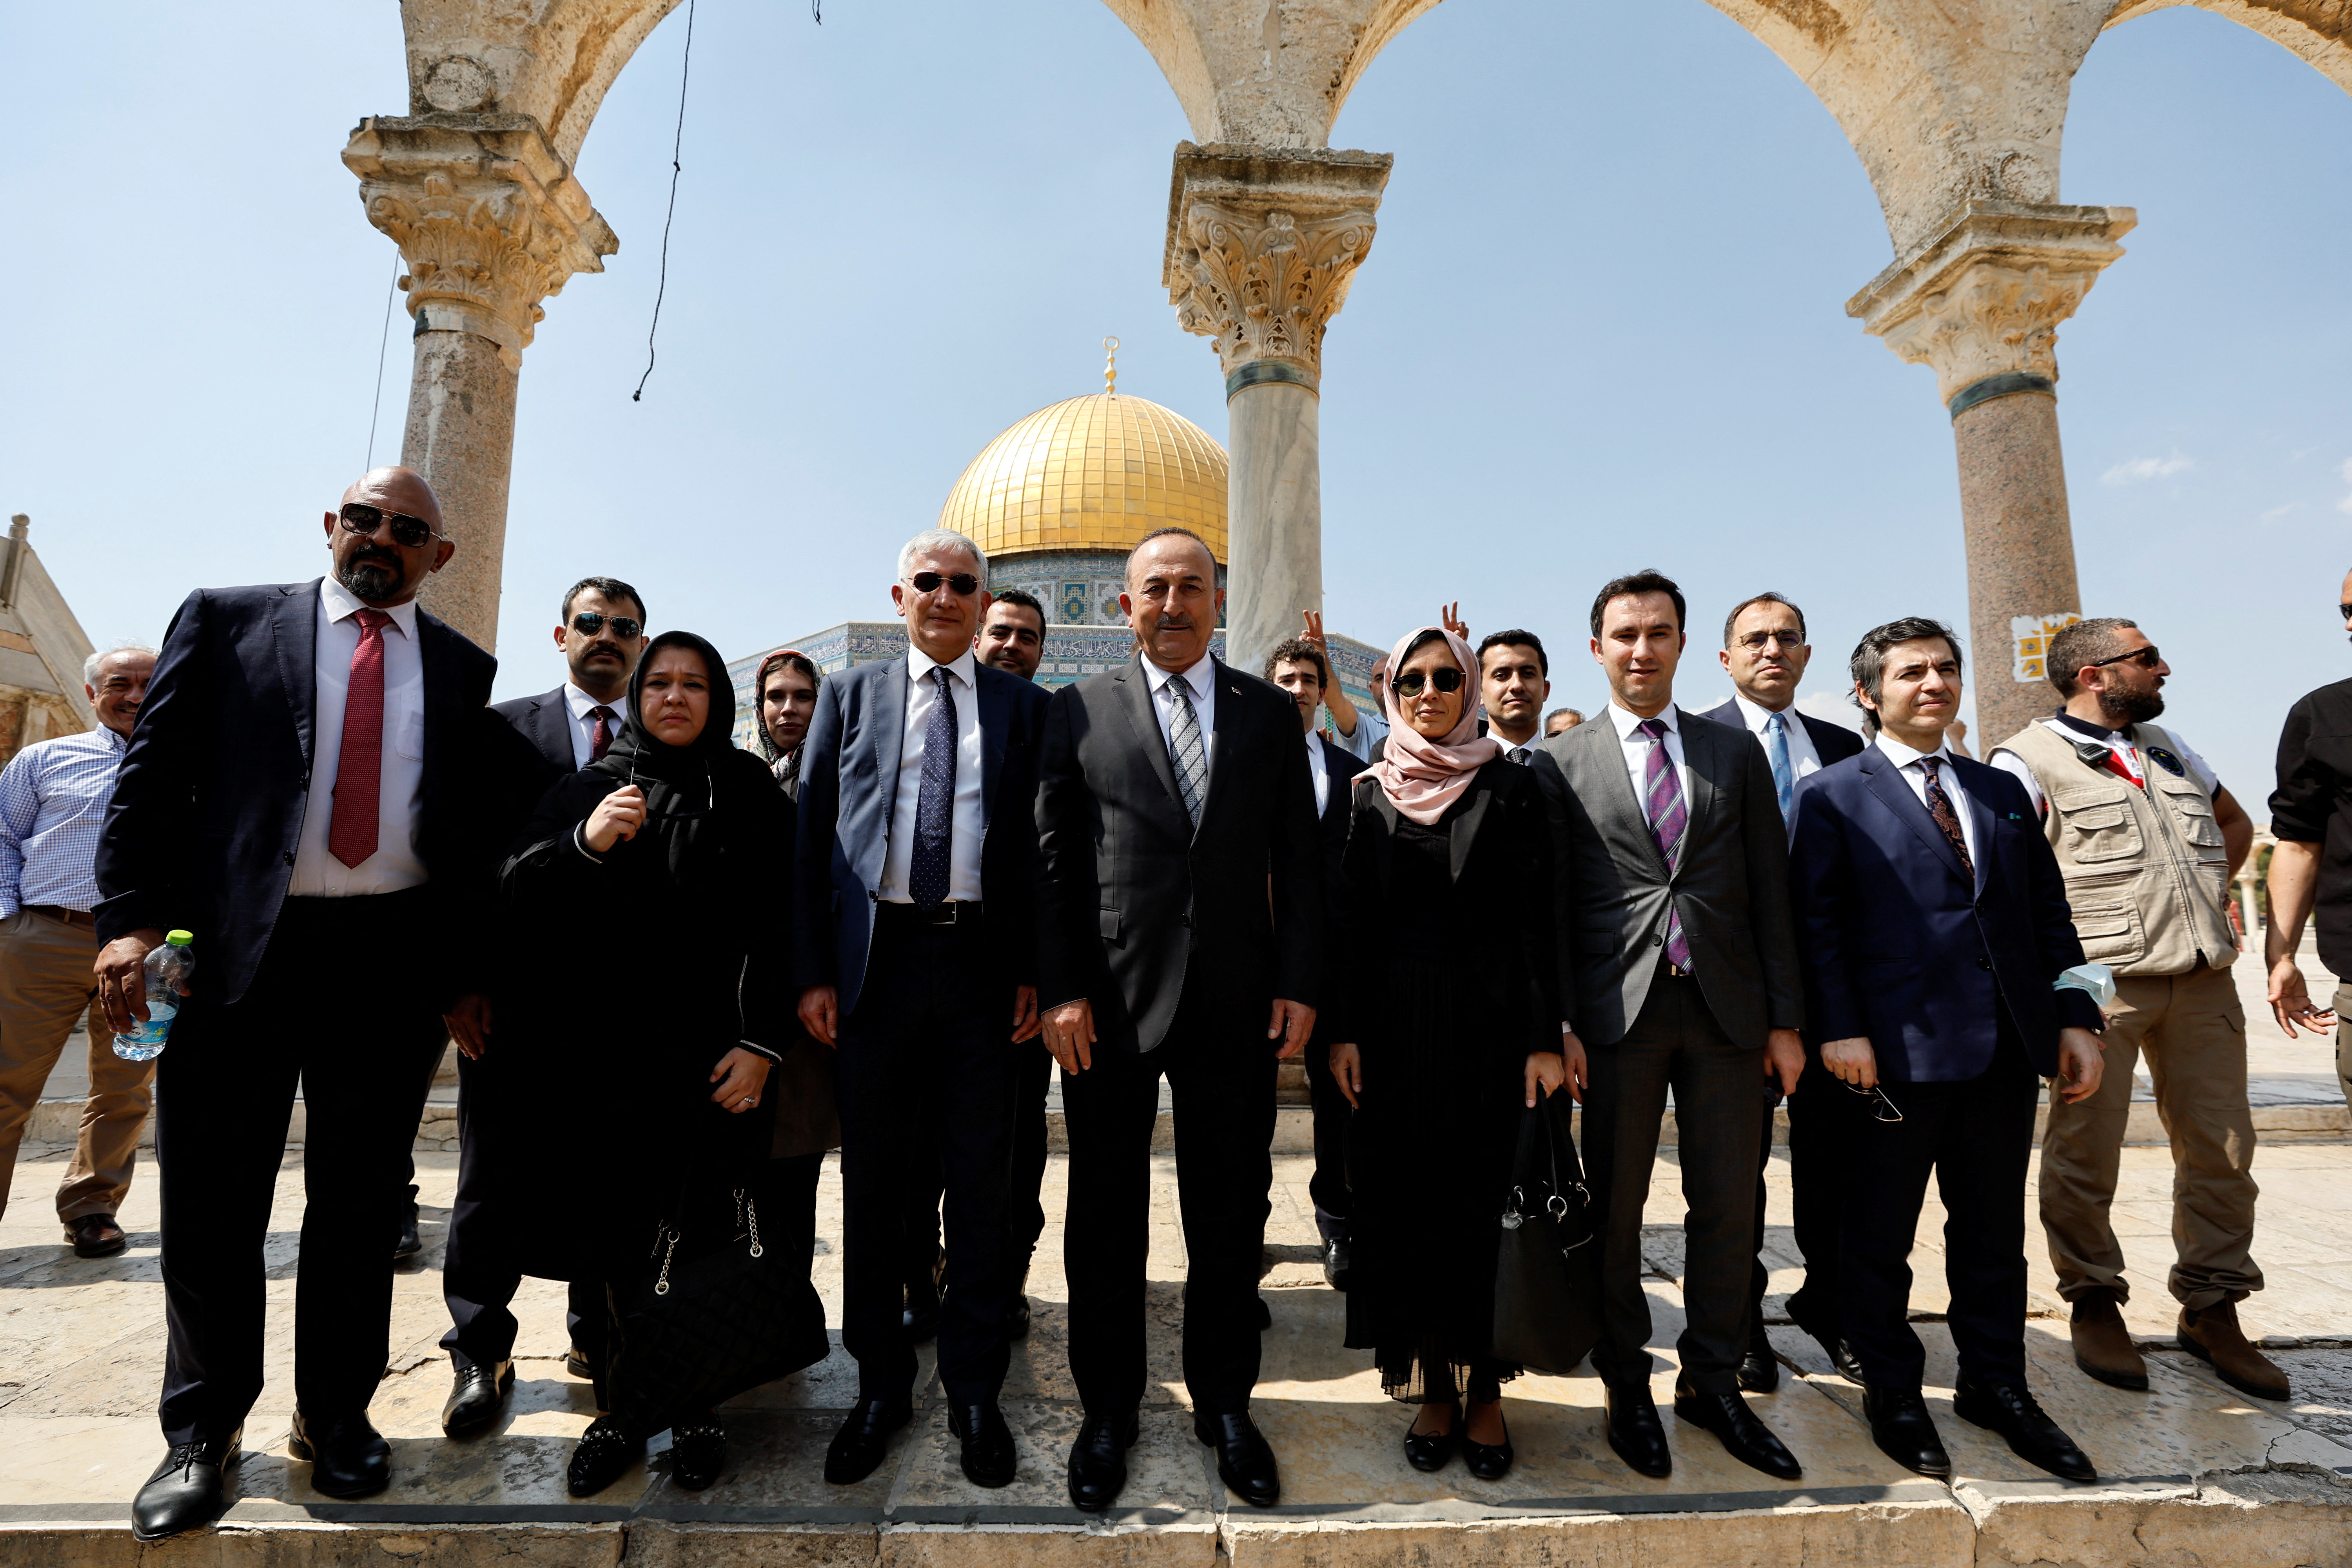 Turkish Foreign Minister Mevlut Cavusoglu visits the compound that houses Al-Aqsa Mosque, known to Muslims as Noble Sanctuary and to Jews as Temple Mount, in Jerusalem's Old City